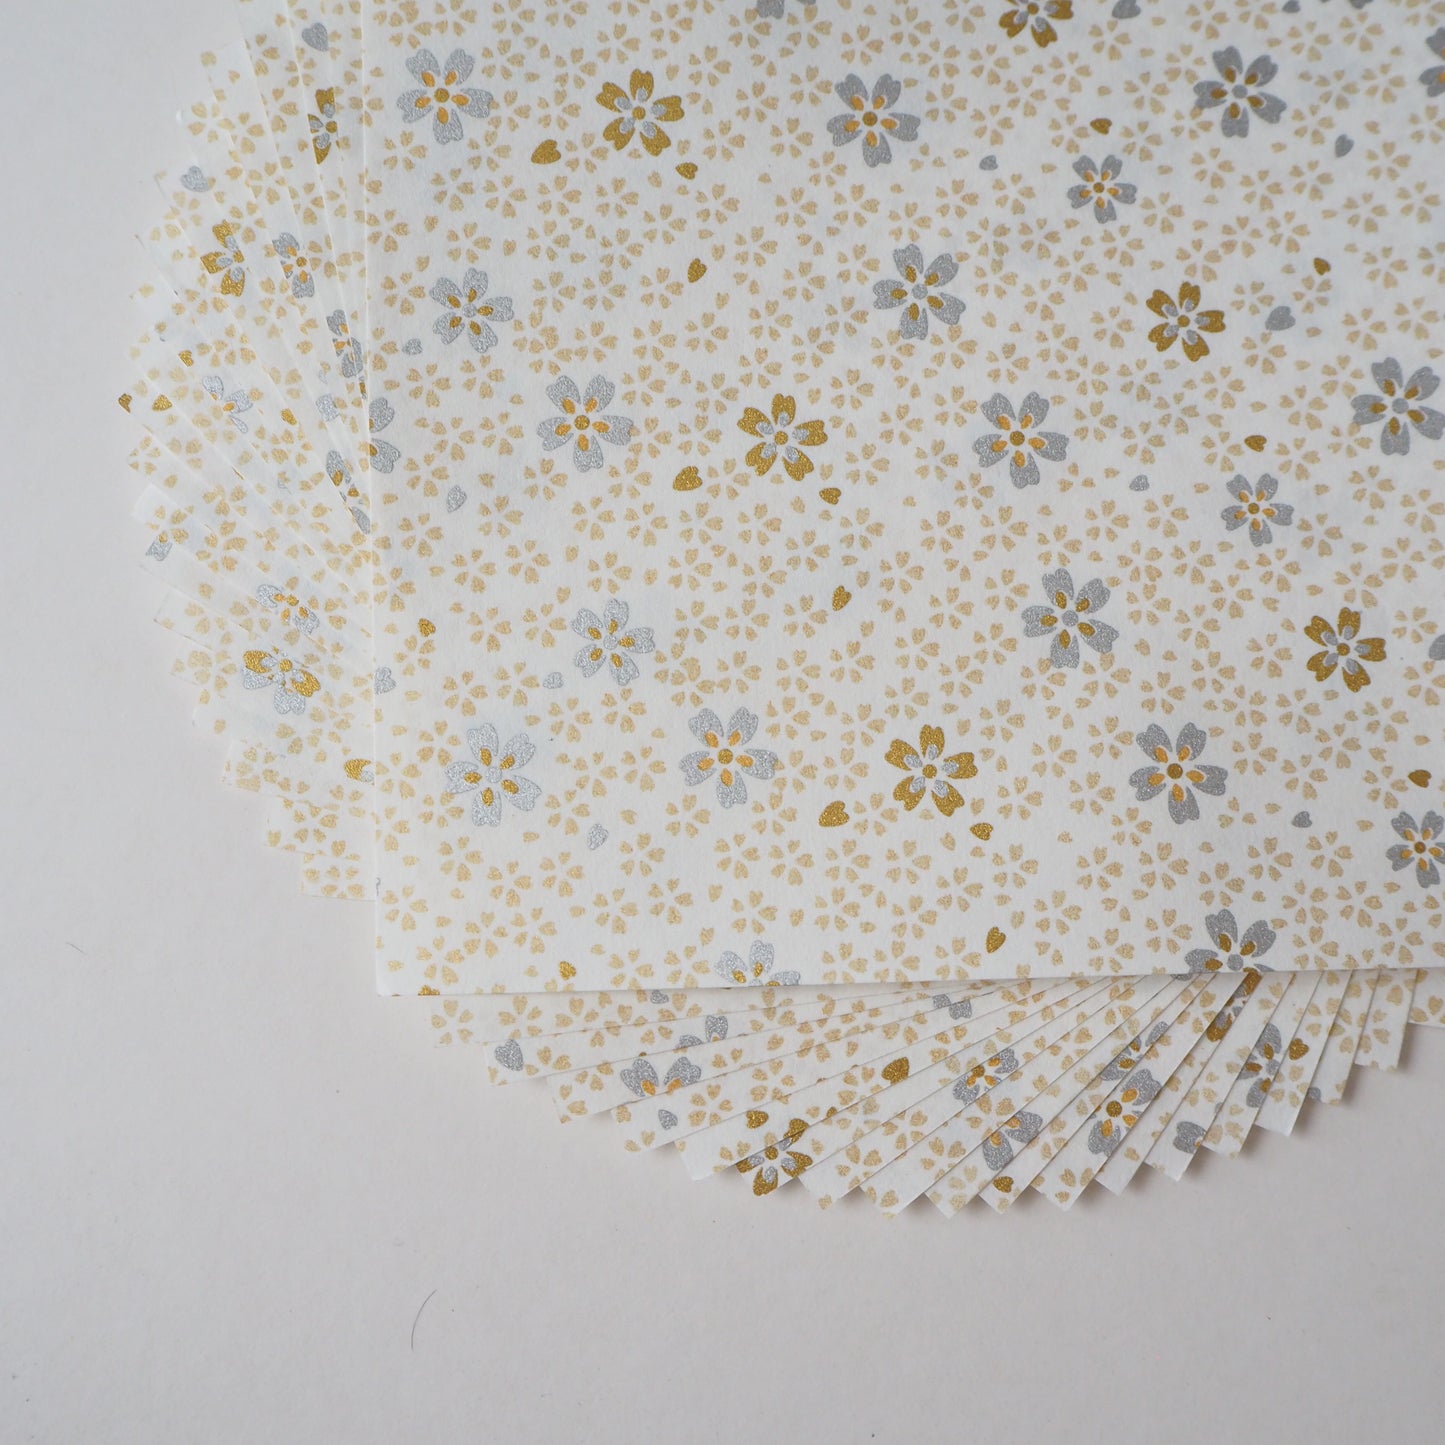 Pack of 20 Sheets 14x14cm Yuzen Washi Origami Paper HZ-157 - Small Gold Cherry Blossom White